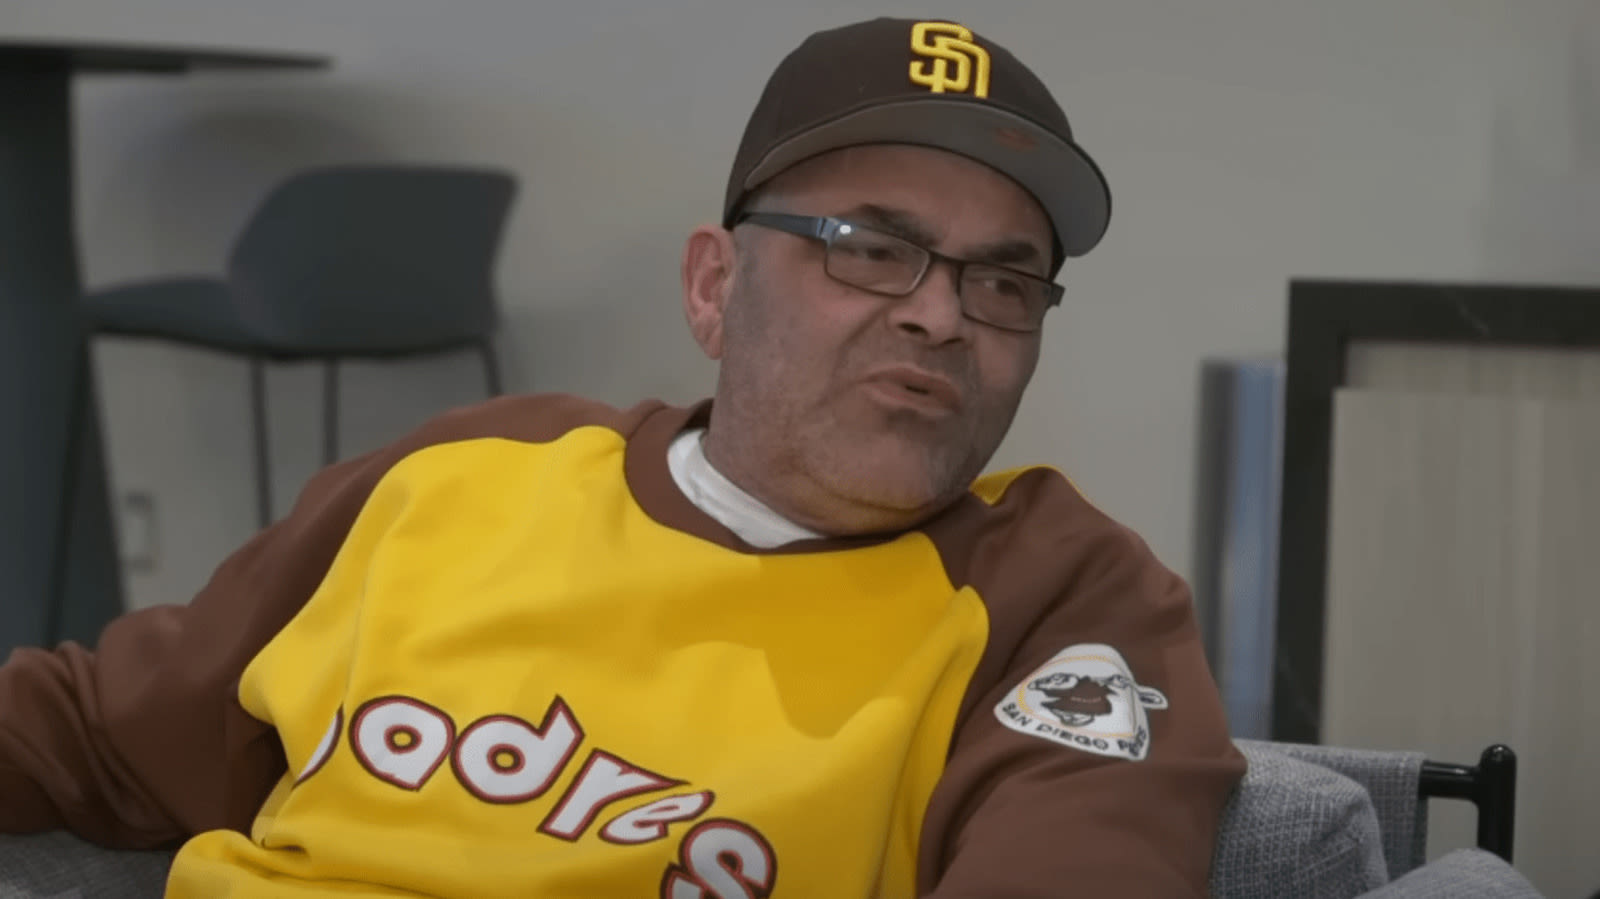 Konnan Explains Why AEW Going Head-To-Head With WWE NXT Would Be A Bad Idea - Wrestling Inc.